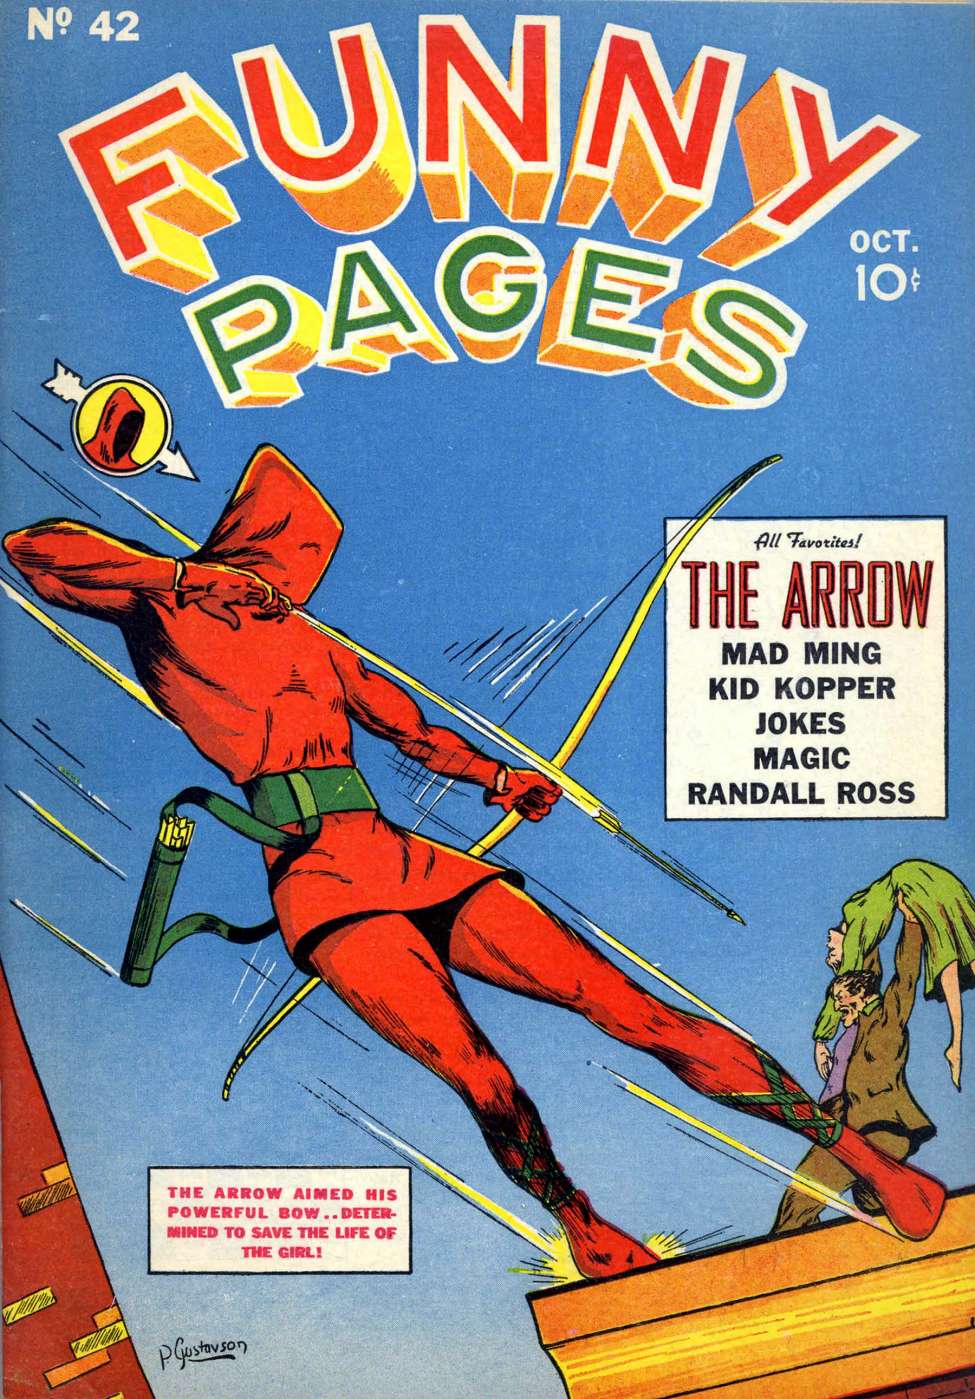 Comic Book Cover For Funny Pages v4 8 (42)